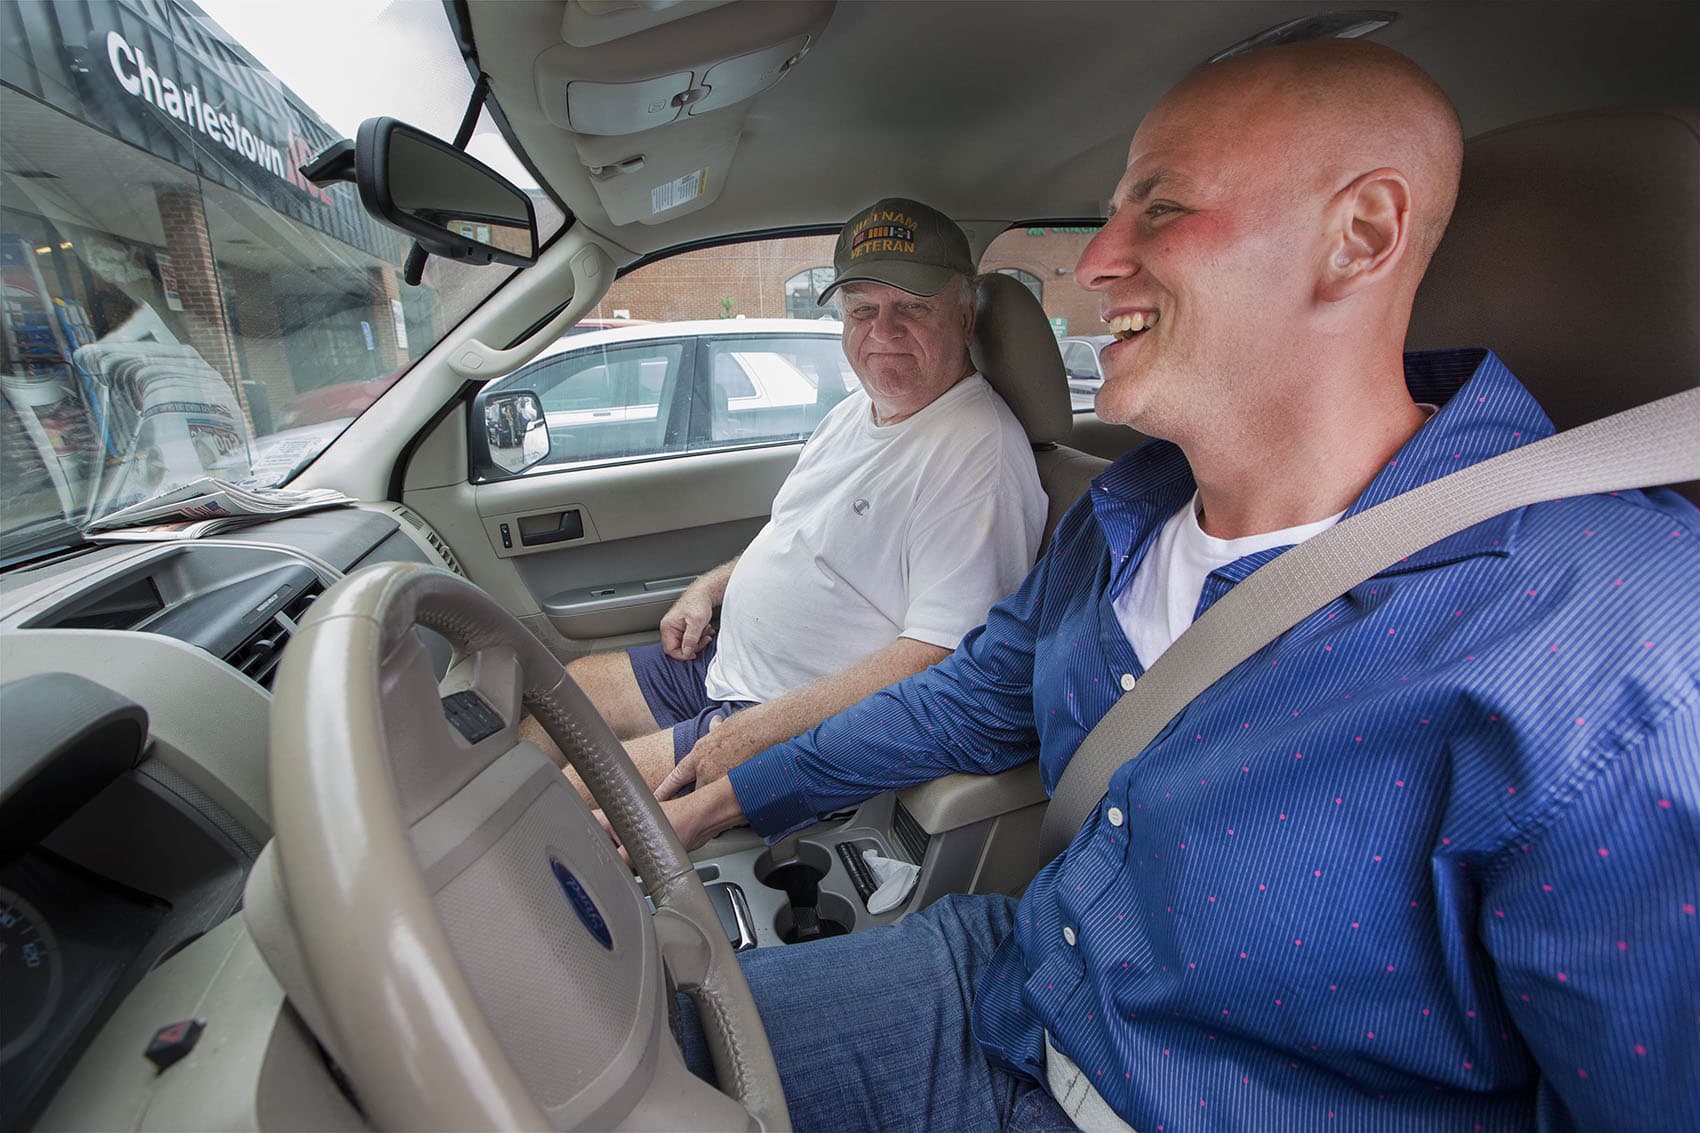 In the parking lot of the Bunker Hill Shopping Mall, Joe Donovan gets a driving lesson from his father, Joe Sr. Joe had never gotten his license before he was incarcerated. (Jesse Costa/WBUR)